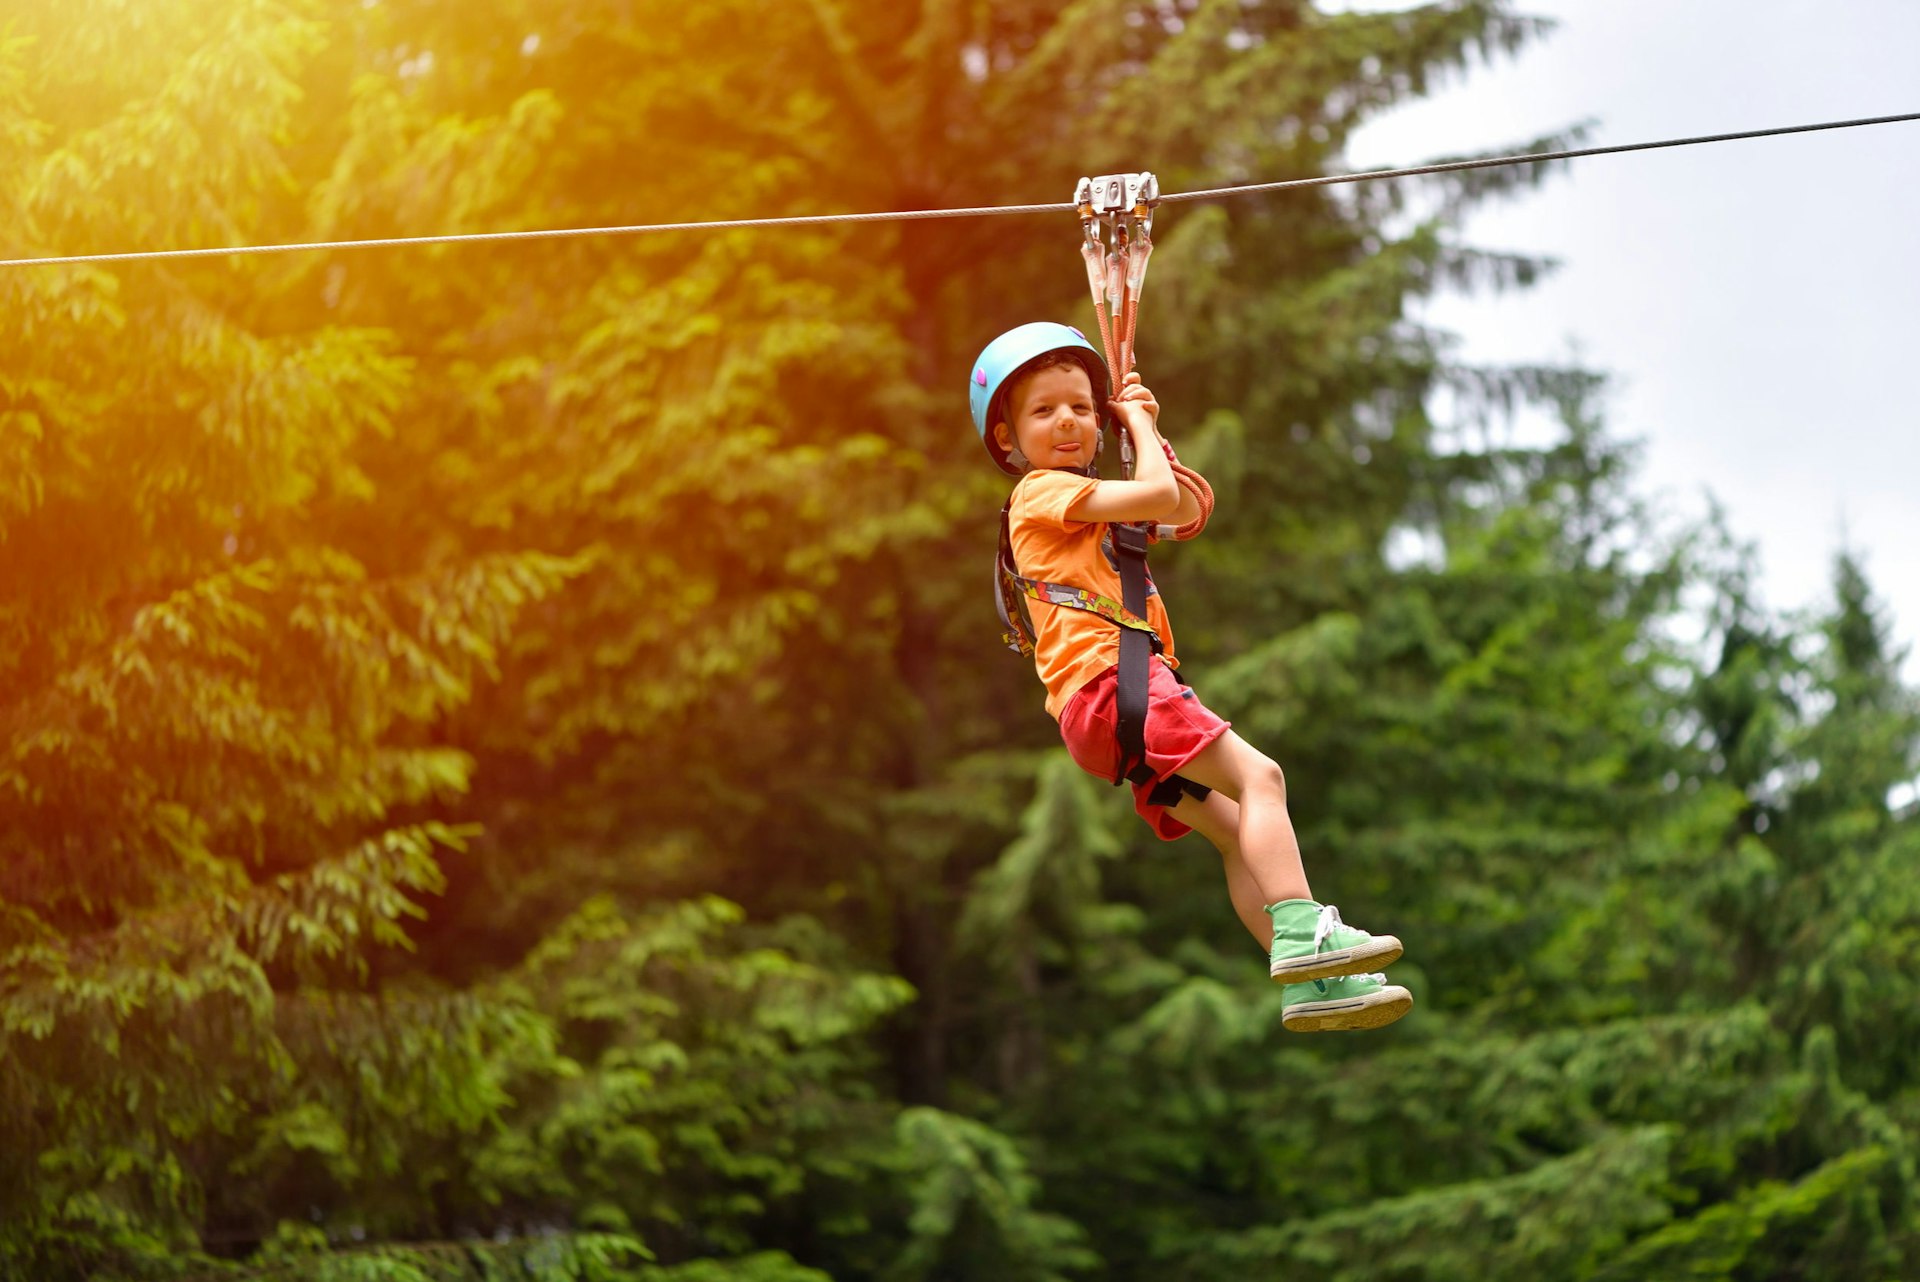 A boy on a zip-line pokes his tongue out.